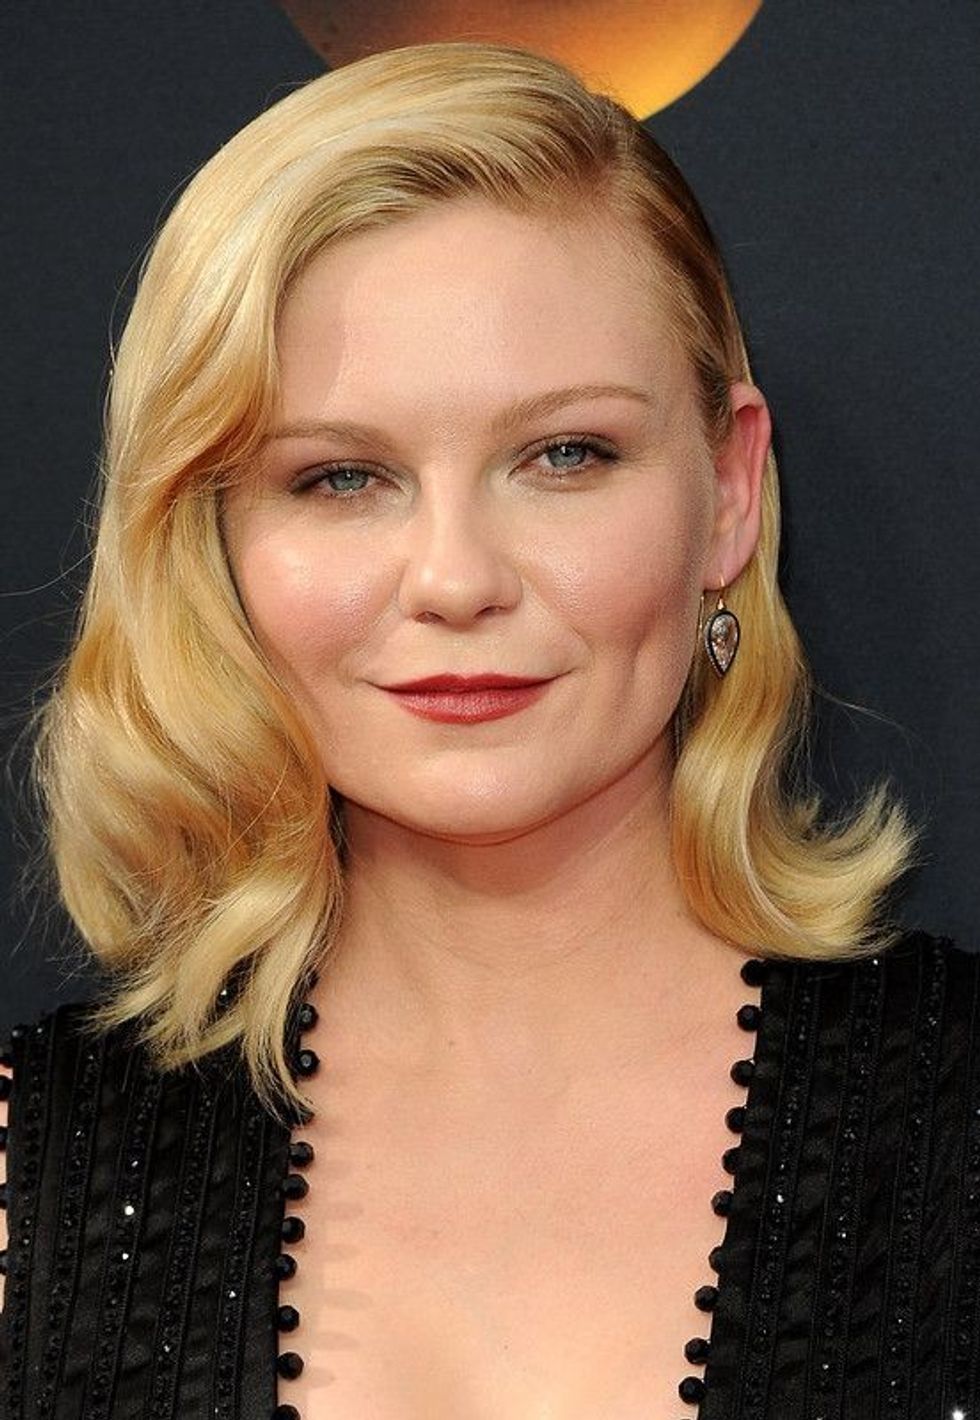 Kristen Dunst, 39 as of 2022, has a total net worth of $25 million. Read on to find out more.